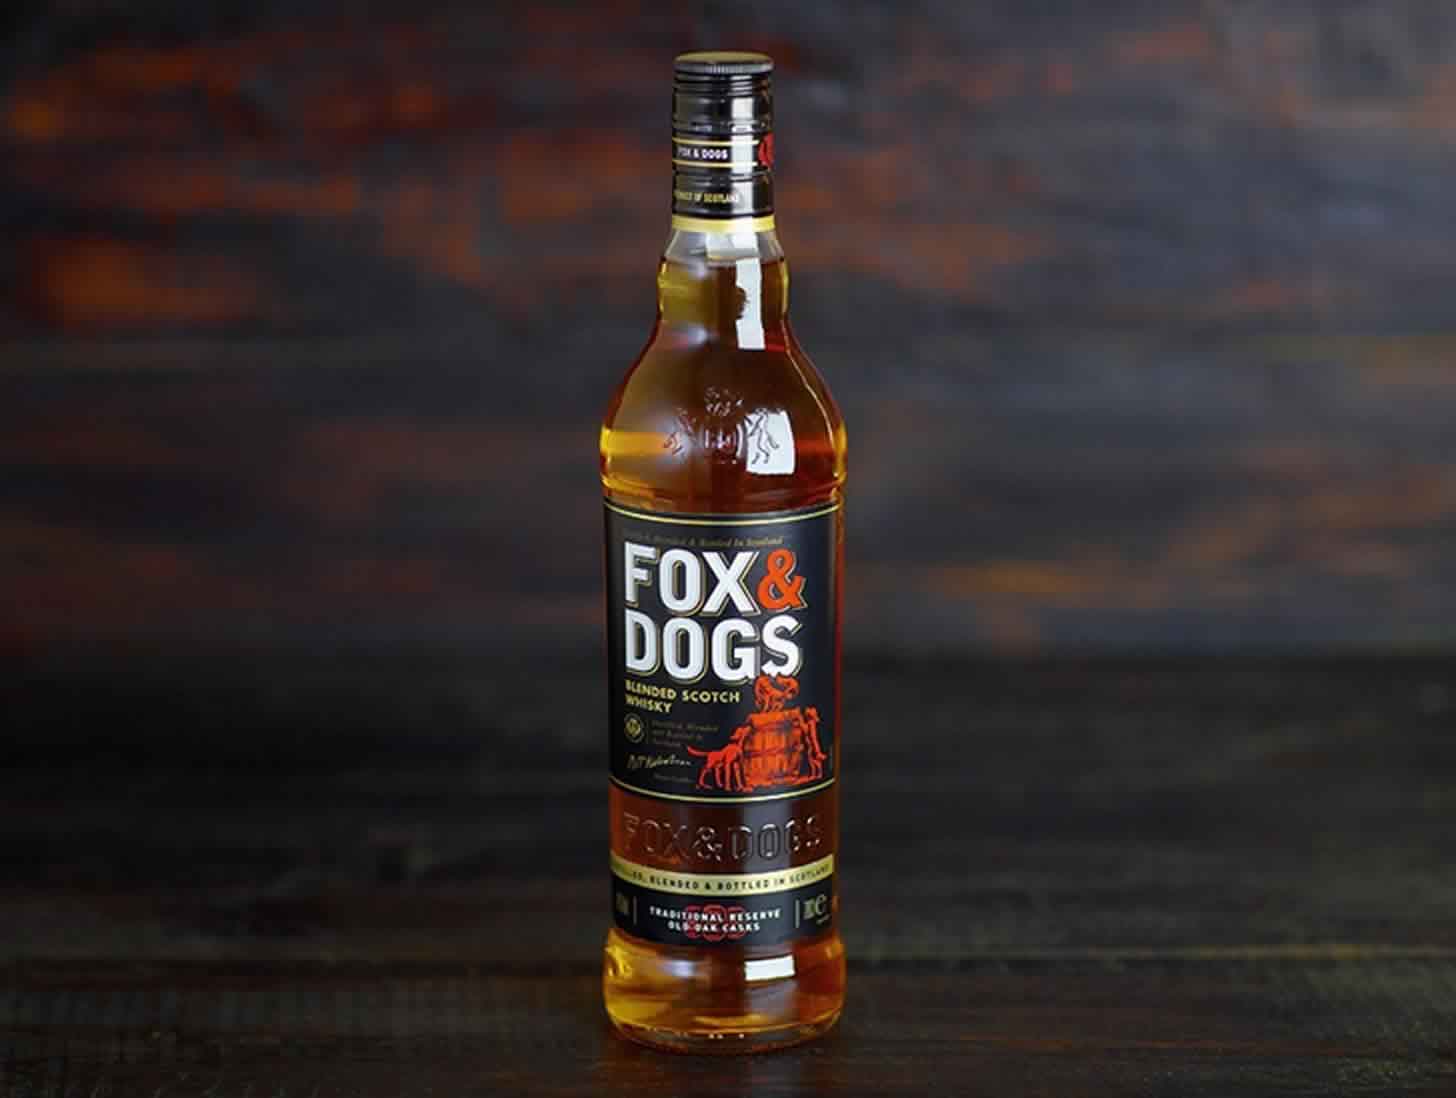 Fox and dogs отзывы. Виски Фокс энд догс 0.5. Виски Фокс энд догс 0.25. Виски шотландский Фокс энд догс. Виски Fox and Dogs 0.250.